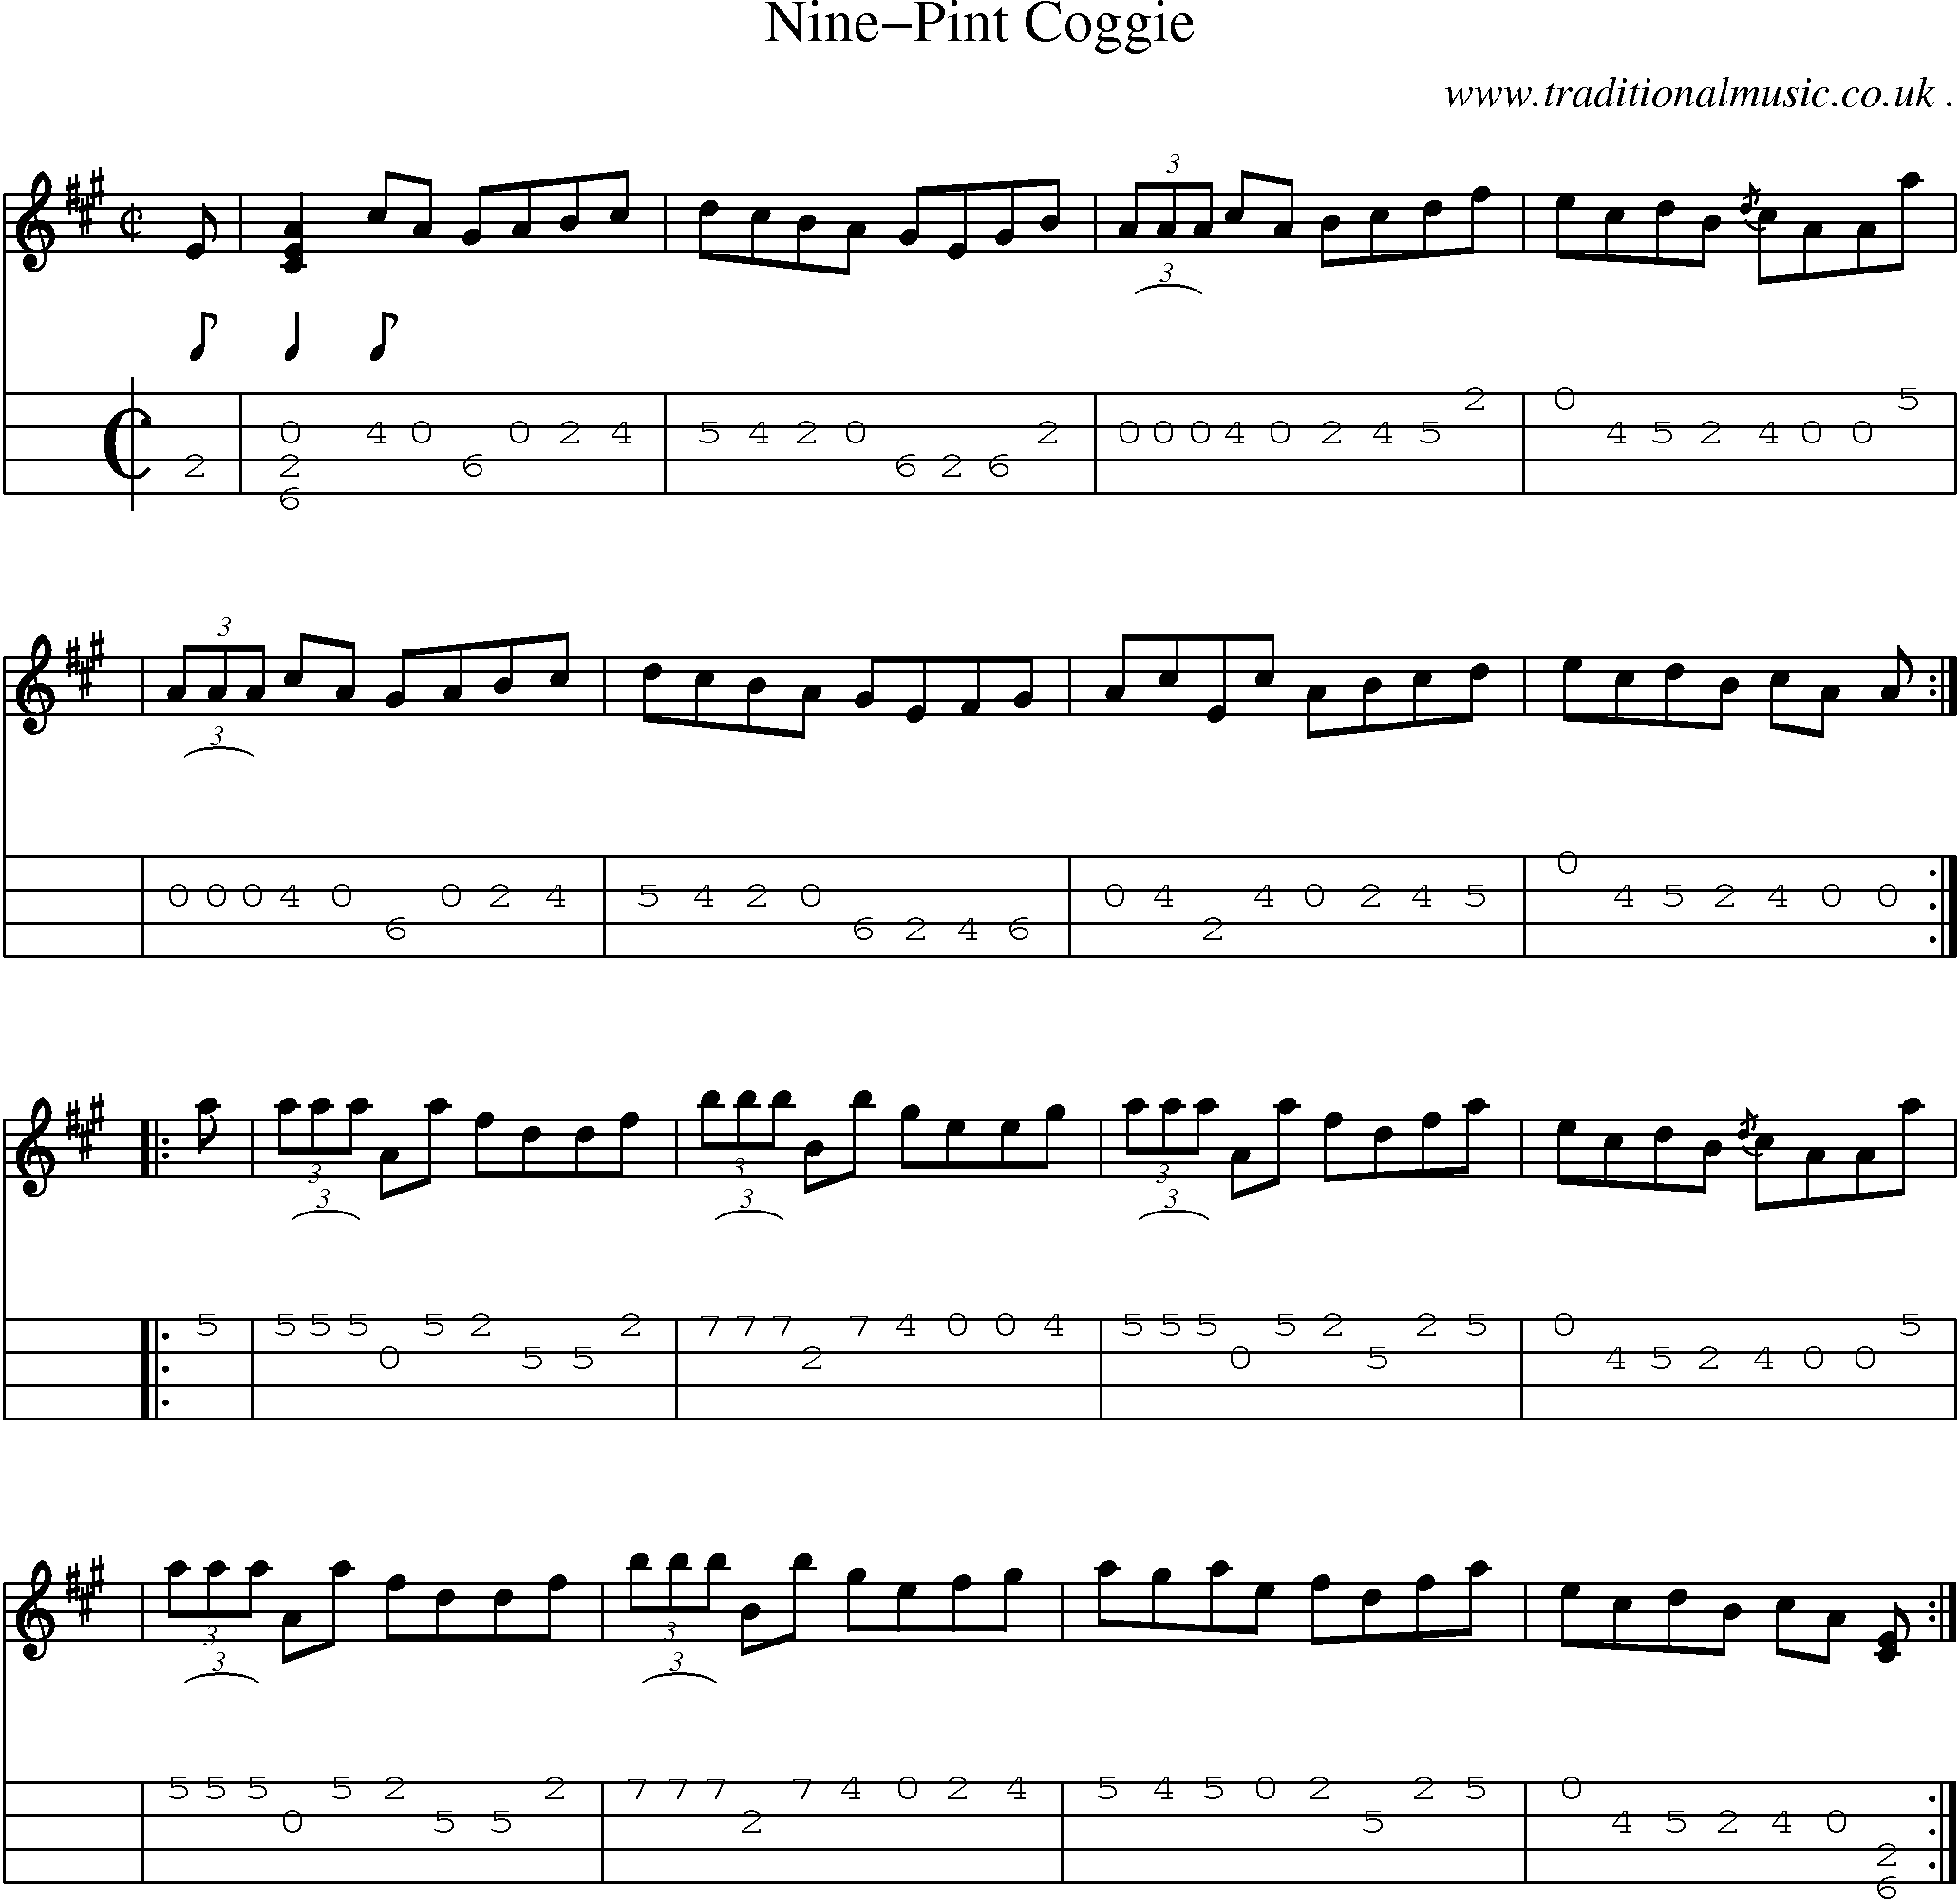 Sheet-music  score, Chords and Mandolin Tabs for Nine-pint Coggie